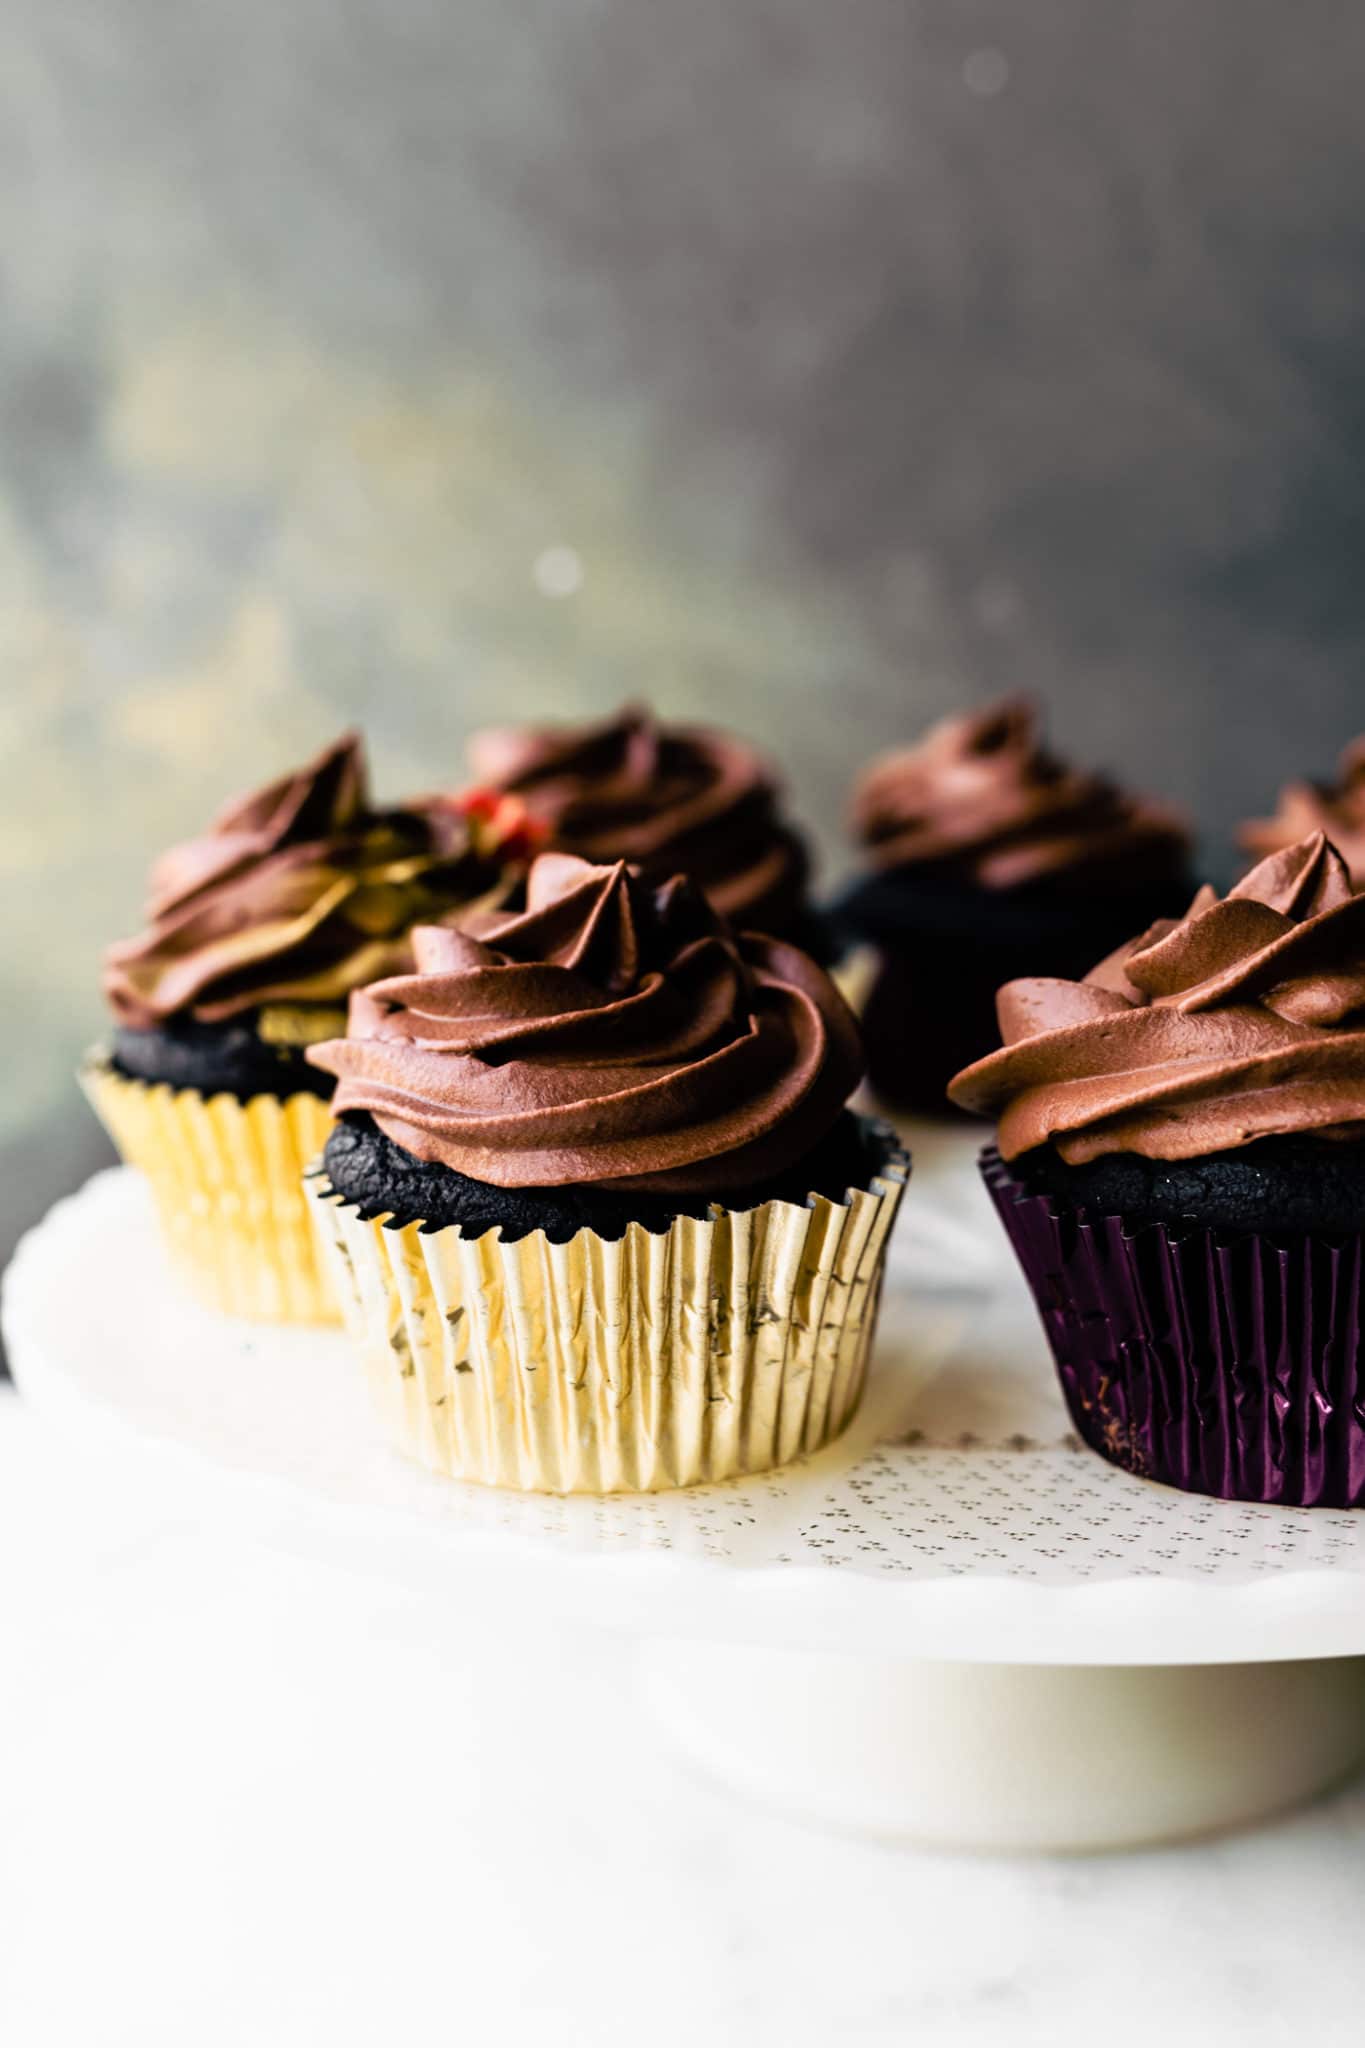 Vegan chocolate cupcakes in gold and purple liners on a white cake plate.